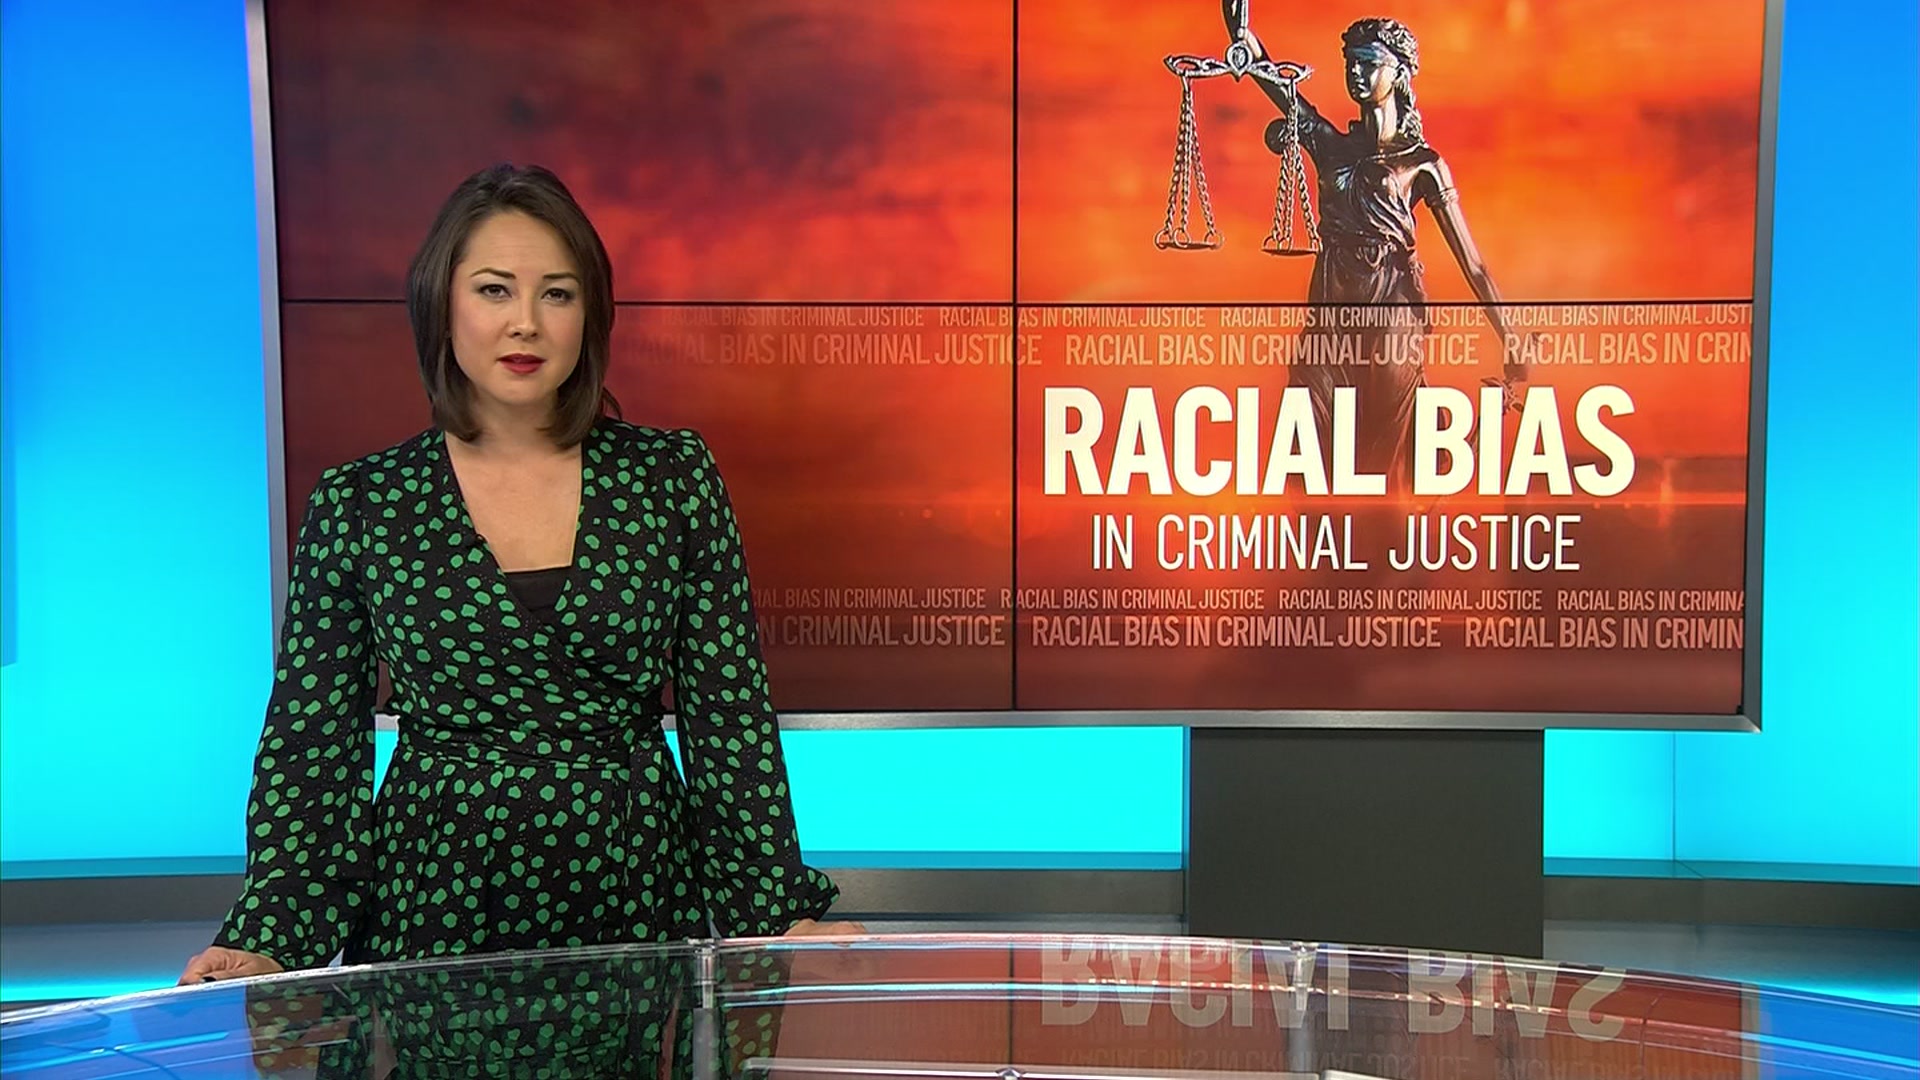 Civil Rights Attorney Says Racial Bias Evident In Local Criminal Justice Nbc 7 San Diego